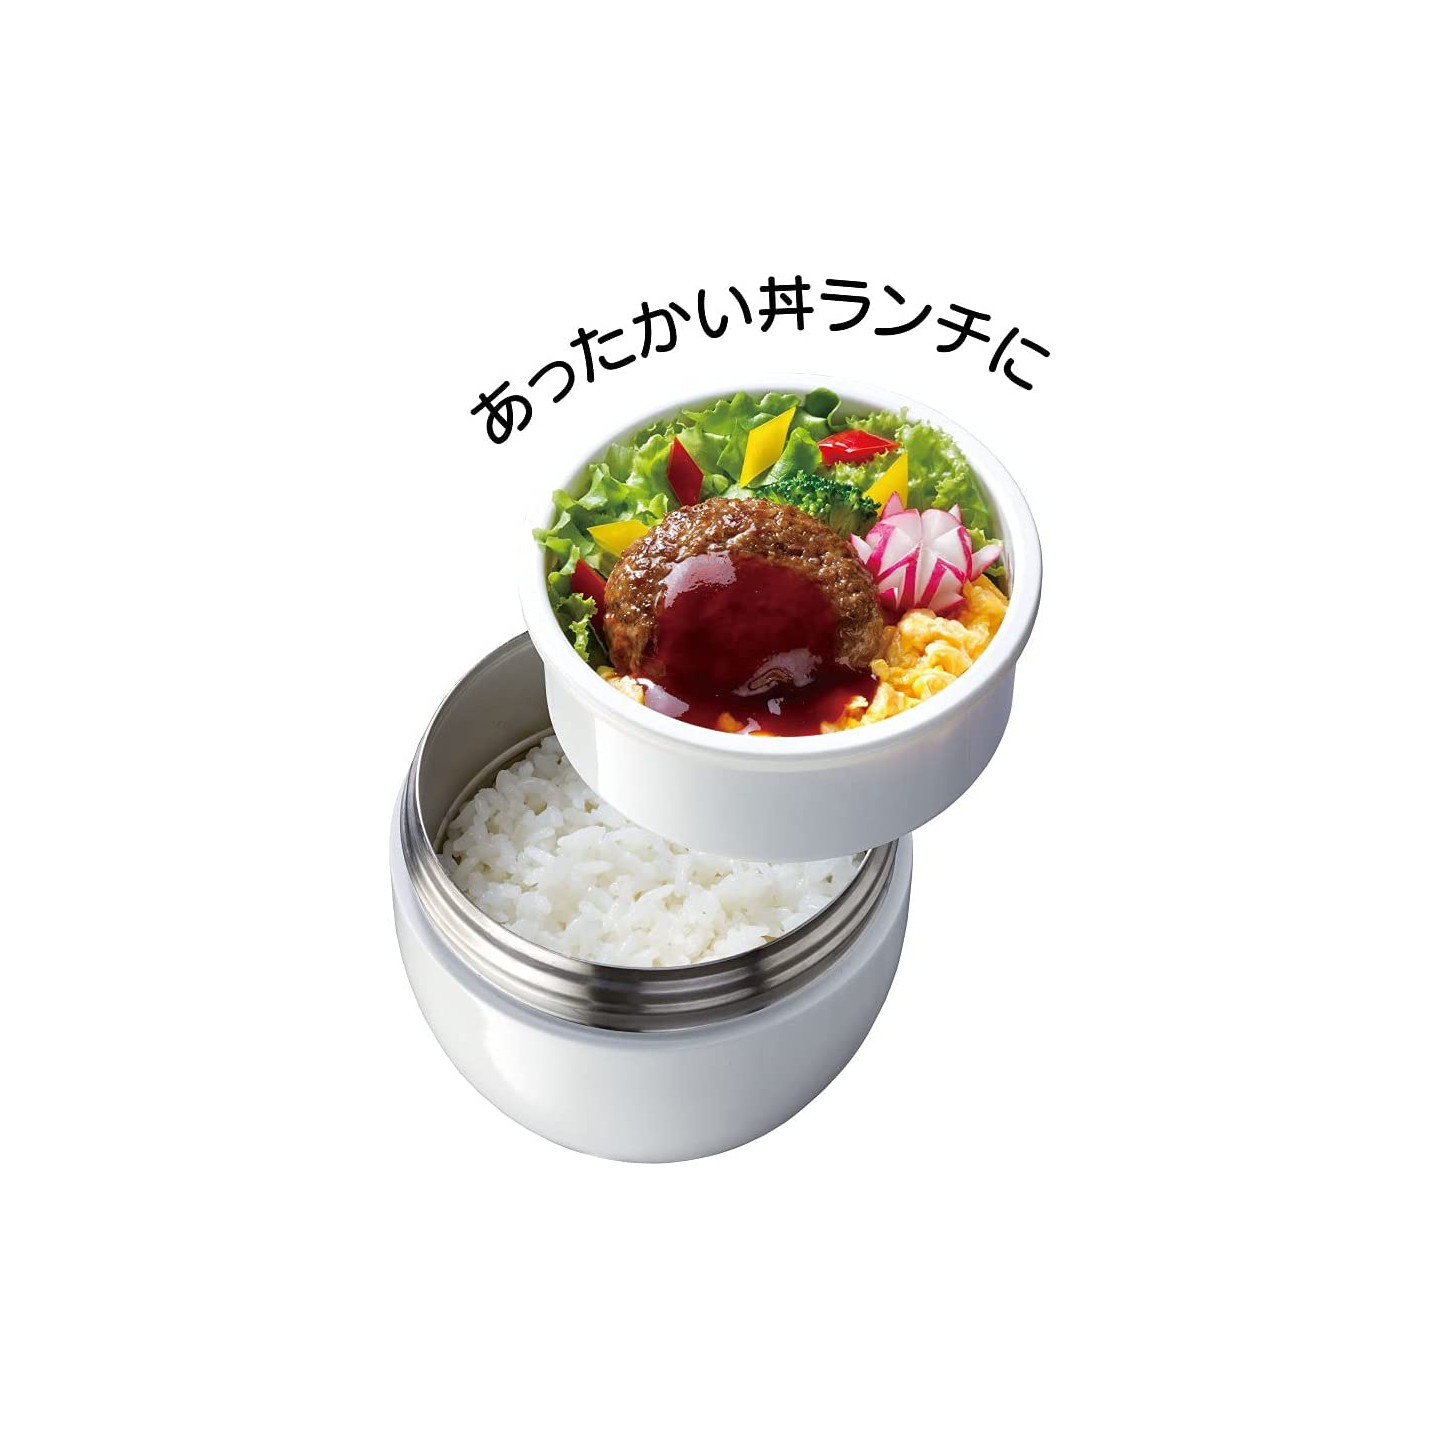 https://cookingsan.com/8201-product_hd/skater-thermal-lunch-box-kiki-s-delivery-service.jpg